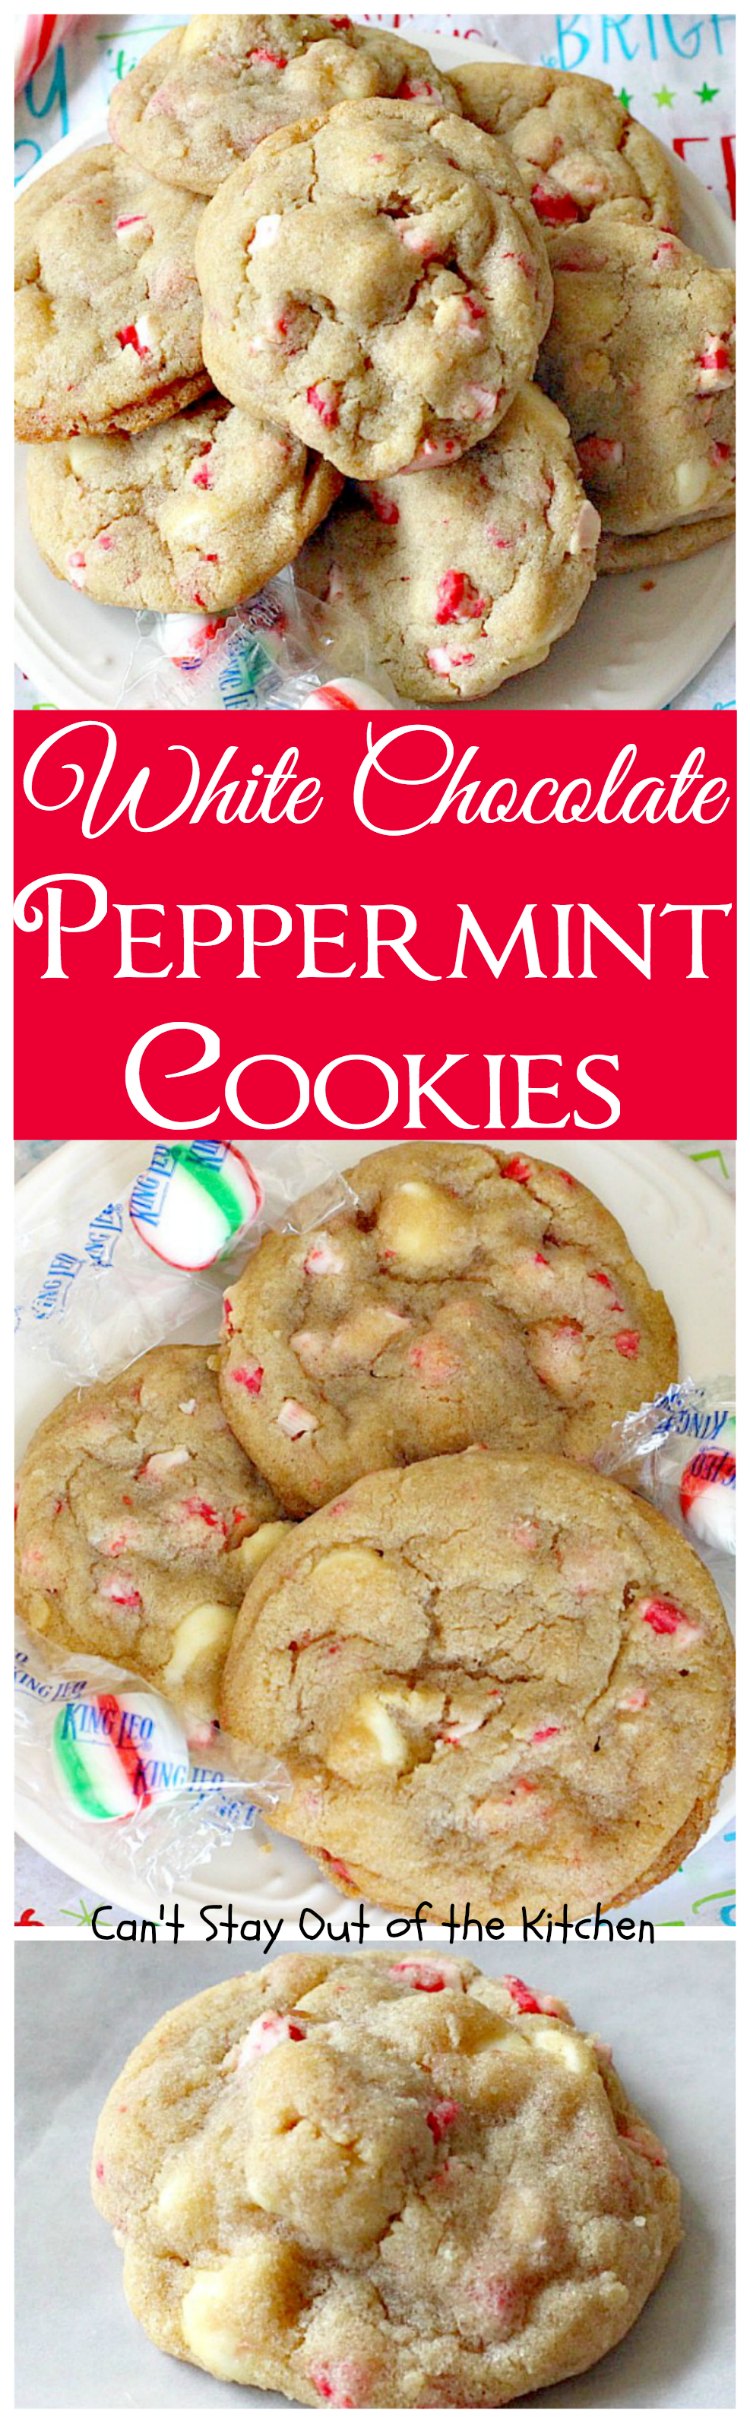 White Chocolate Peppermint Cookies | Can't Stay Out of the Kitchen